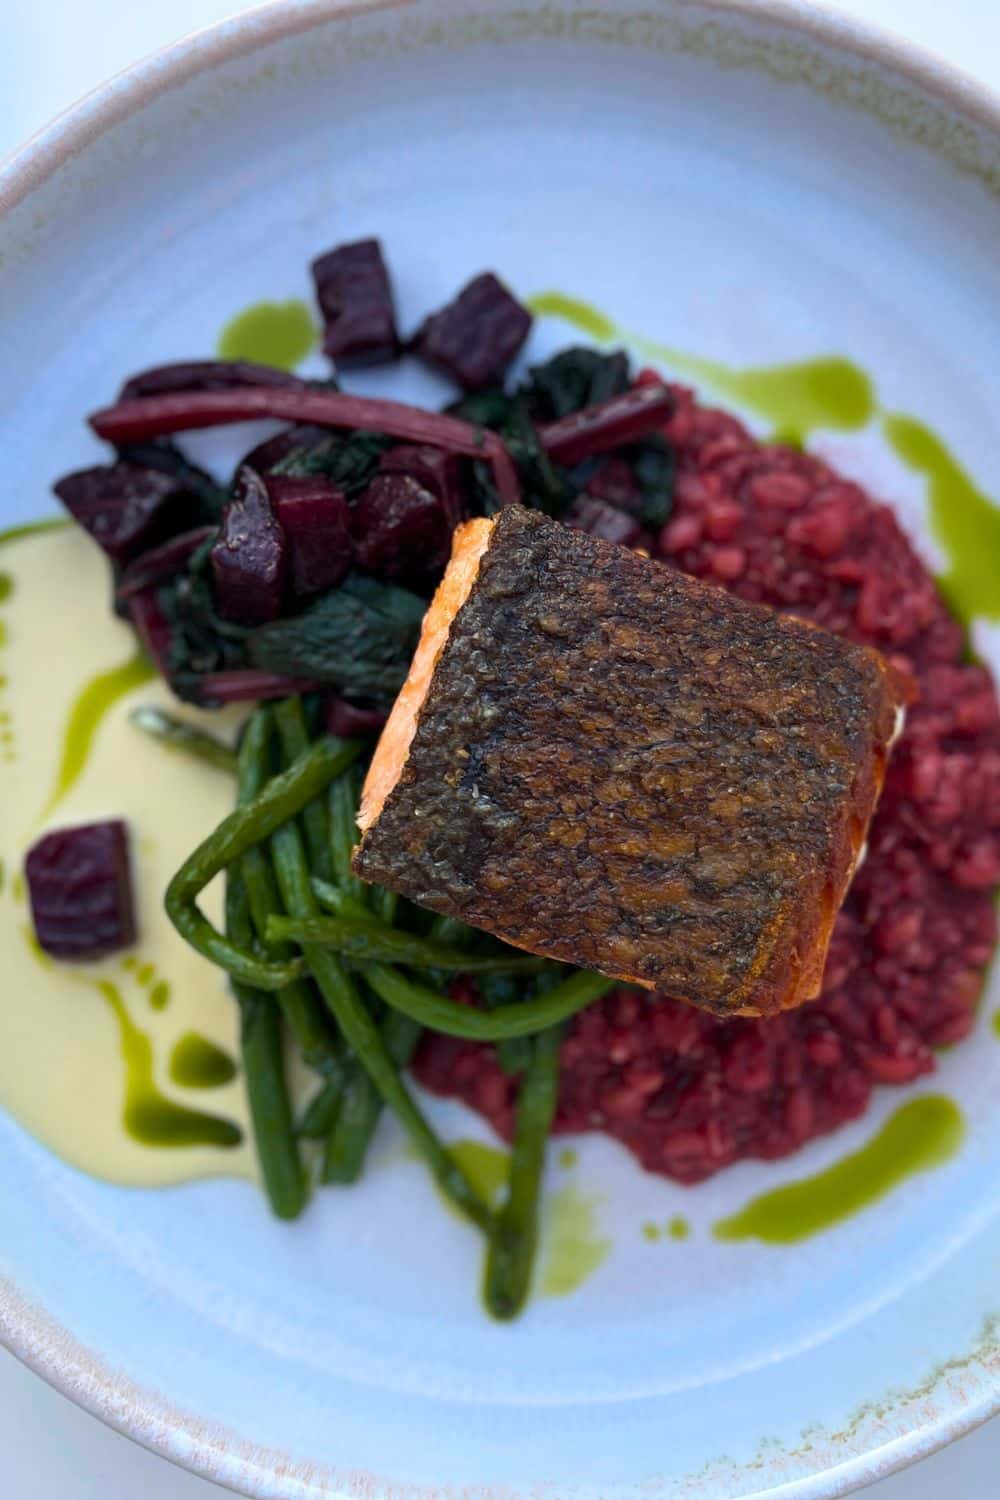 Deliciously prepared salmon served with beetroot and green beans over red rice, presented on a ceramic plate, showcasing Hydra's culinary delights.